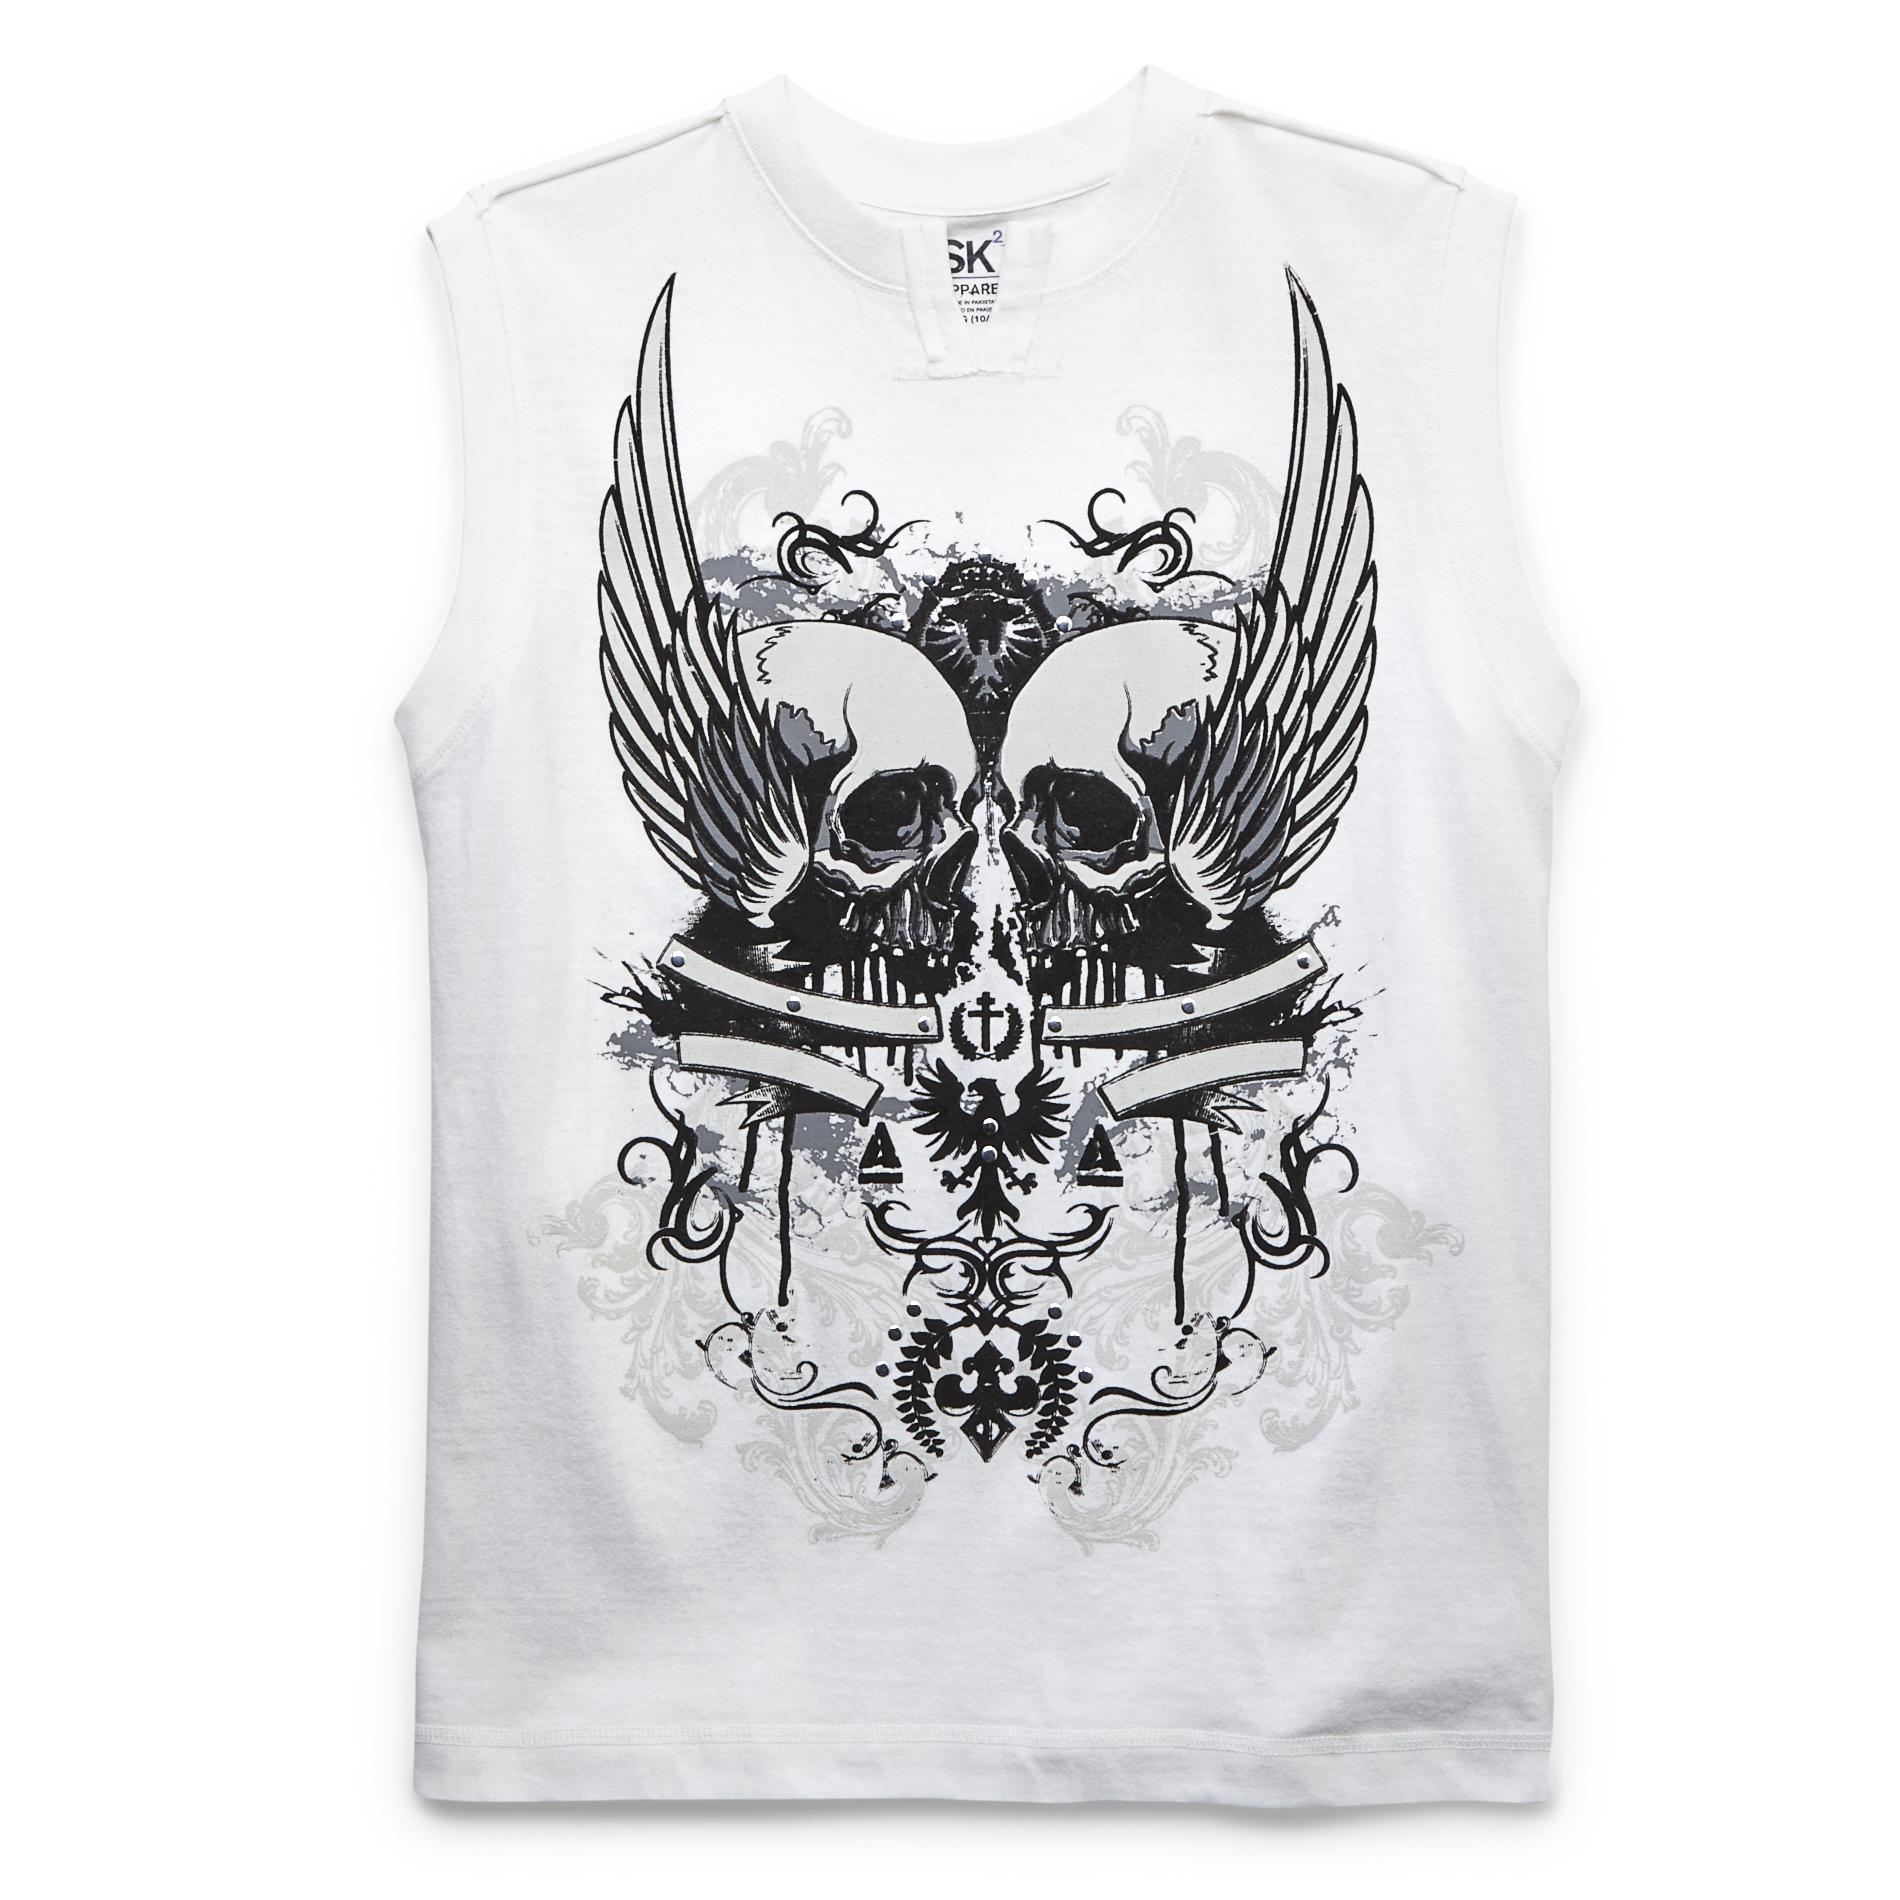 SK2 Boy's Graphic Tank Top - Flocked